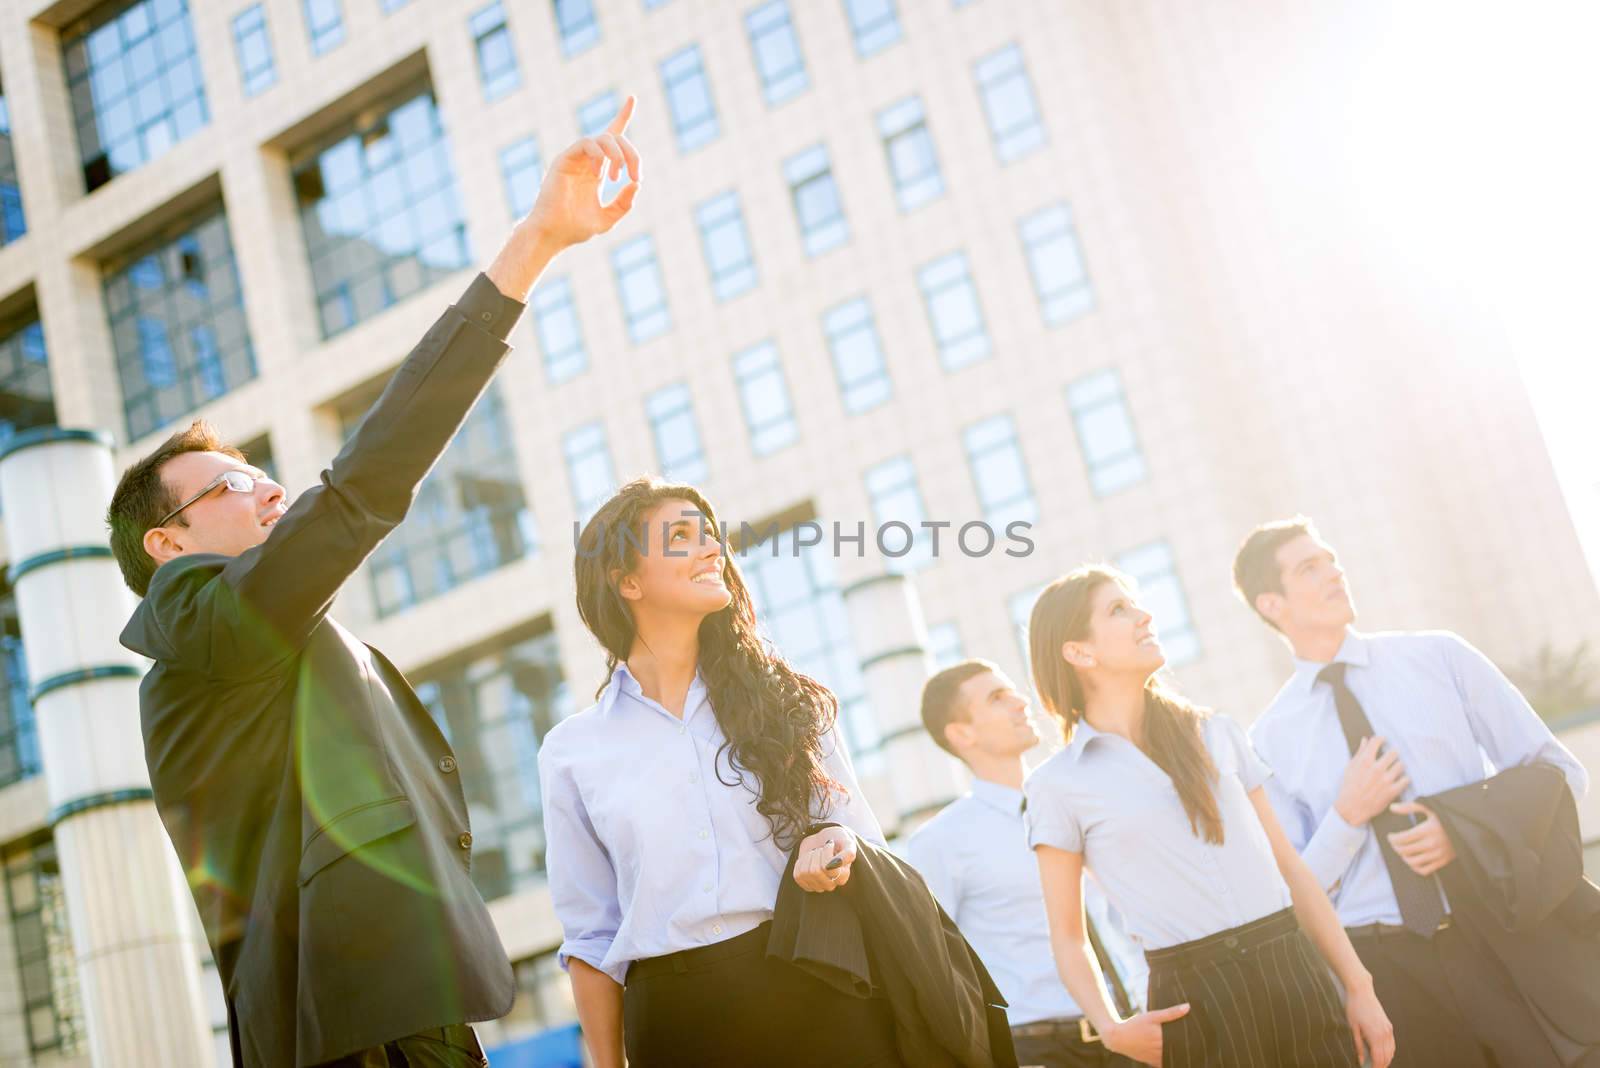 The young businessman in front of office building outstretched fingers of the hand, aimed at heights, shows his young business team motivating them to new business success, while the sun shines from behind.